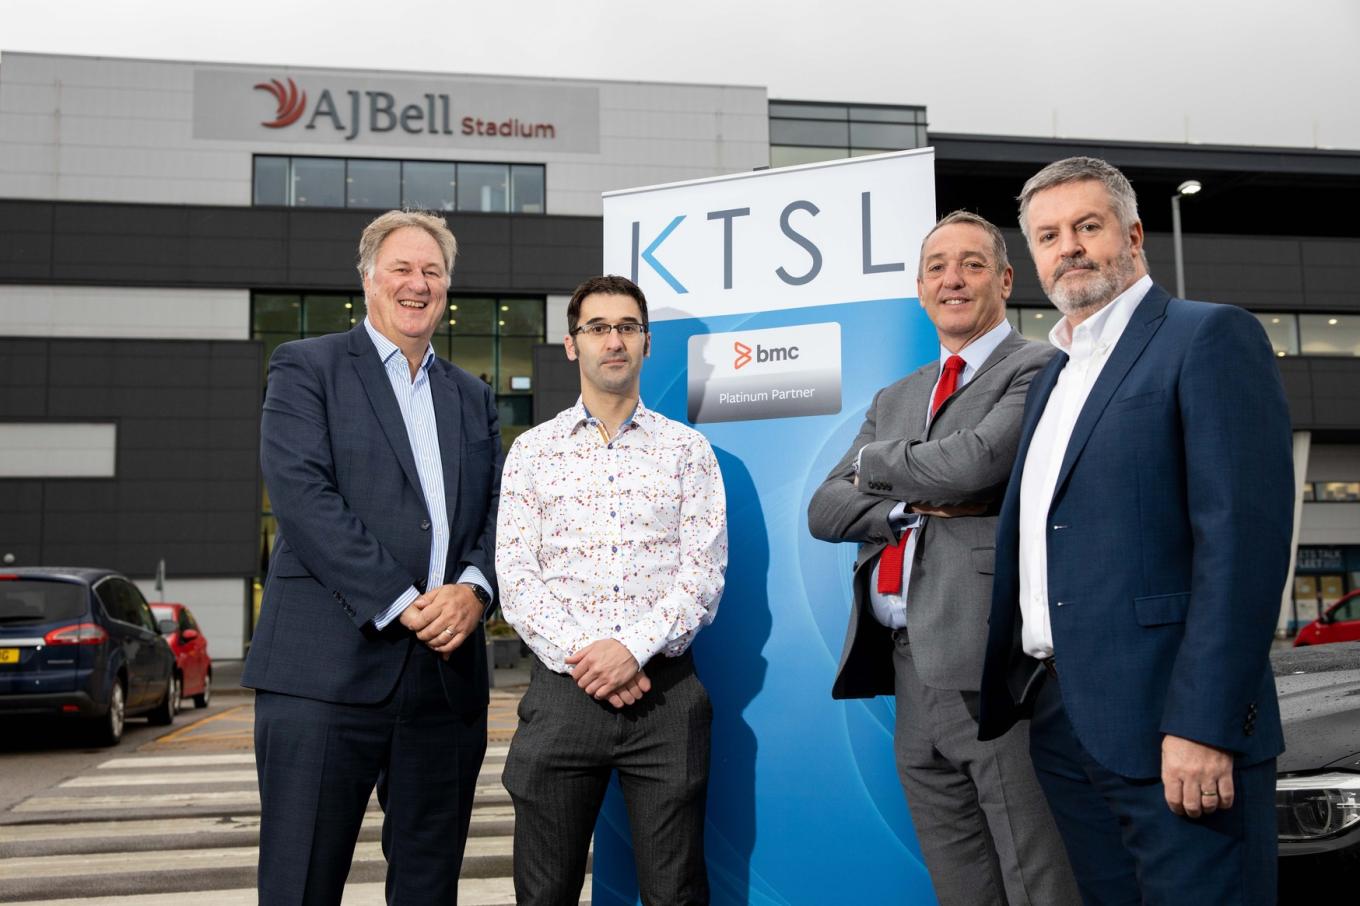 4 men in suits stood in a car park outside of the AJ Bell Stadium with a KTSL pop up banner between them